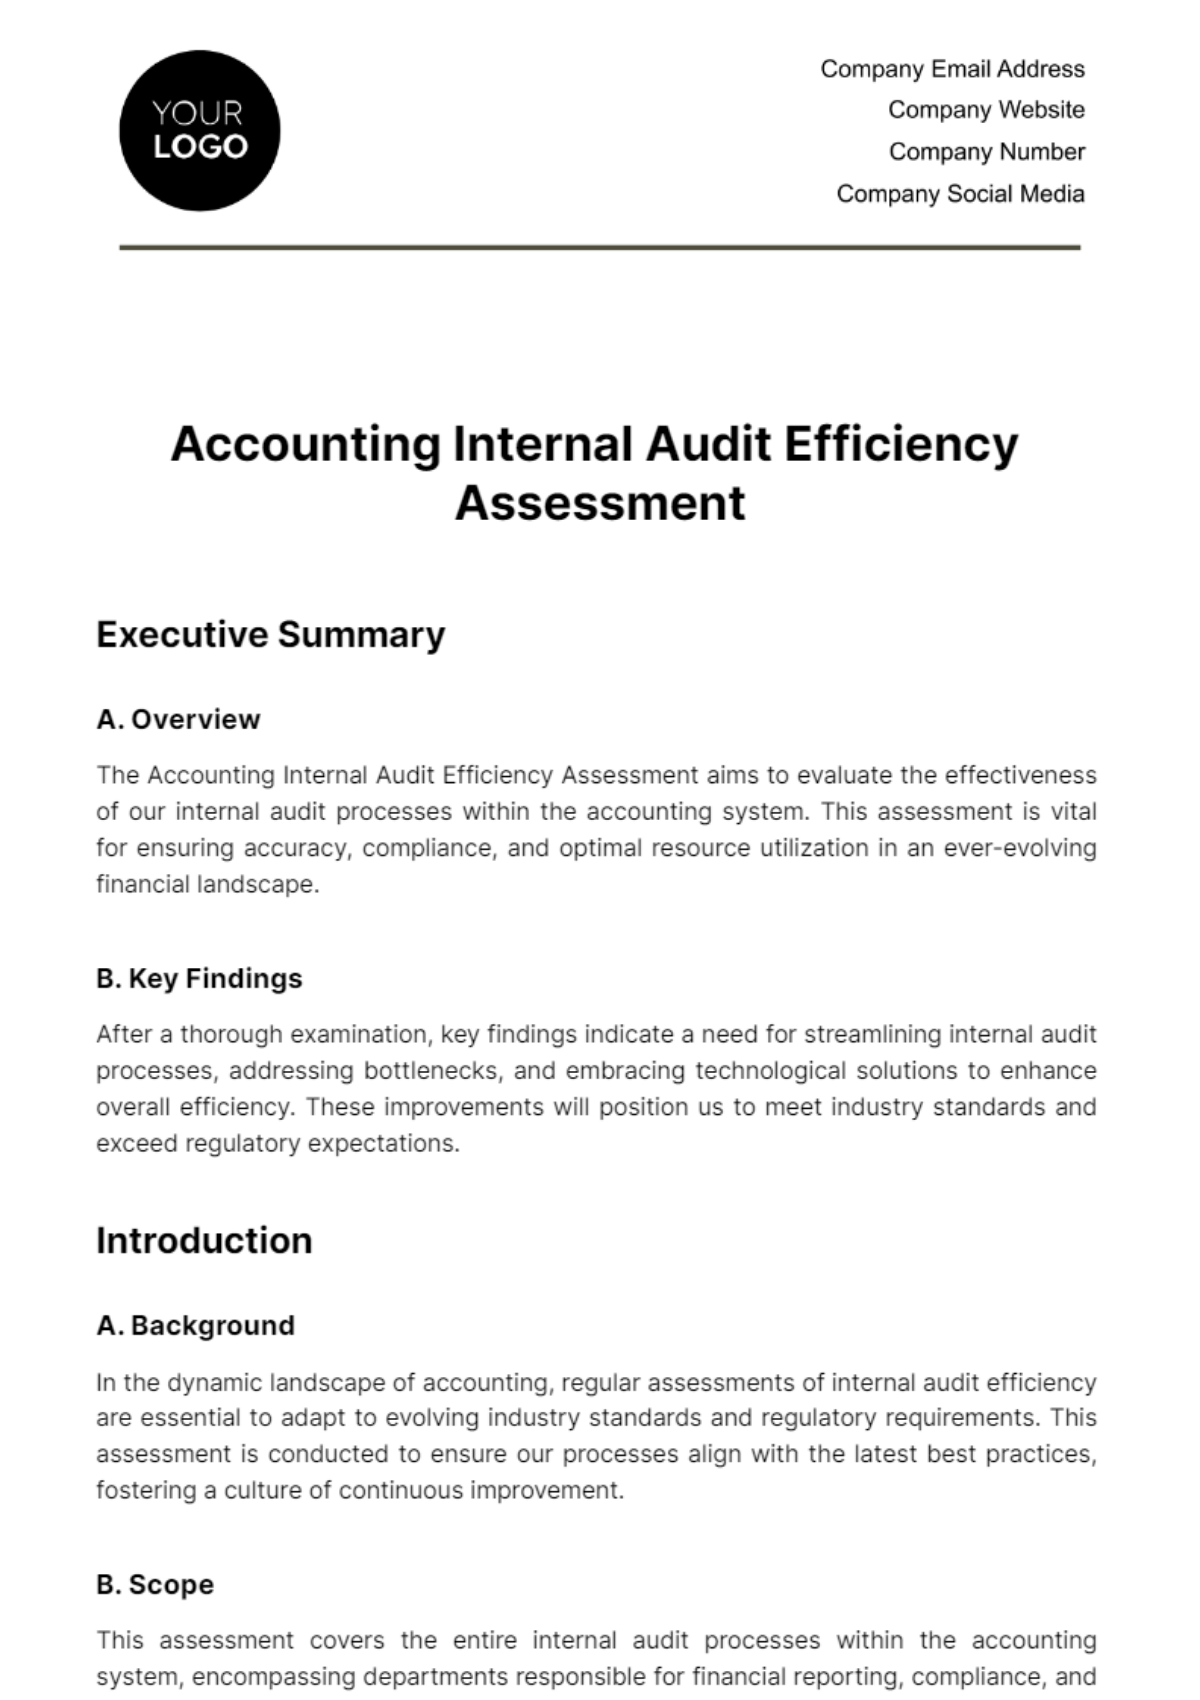 Accounting Internal Audit Efficiency Assessment Template